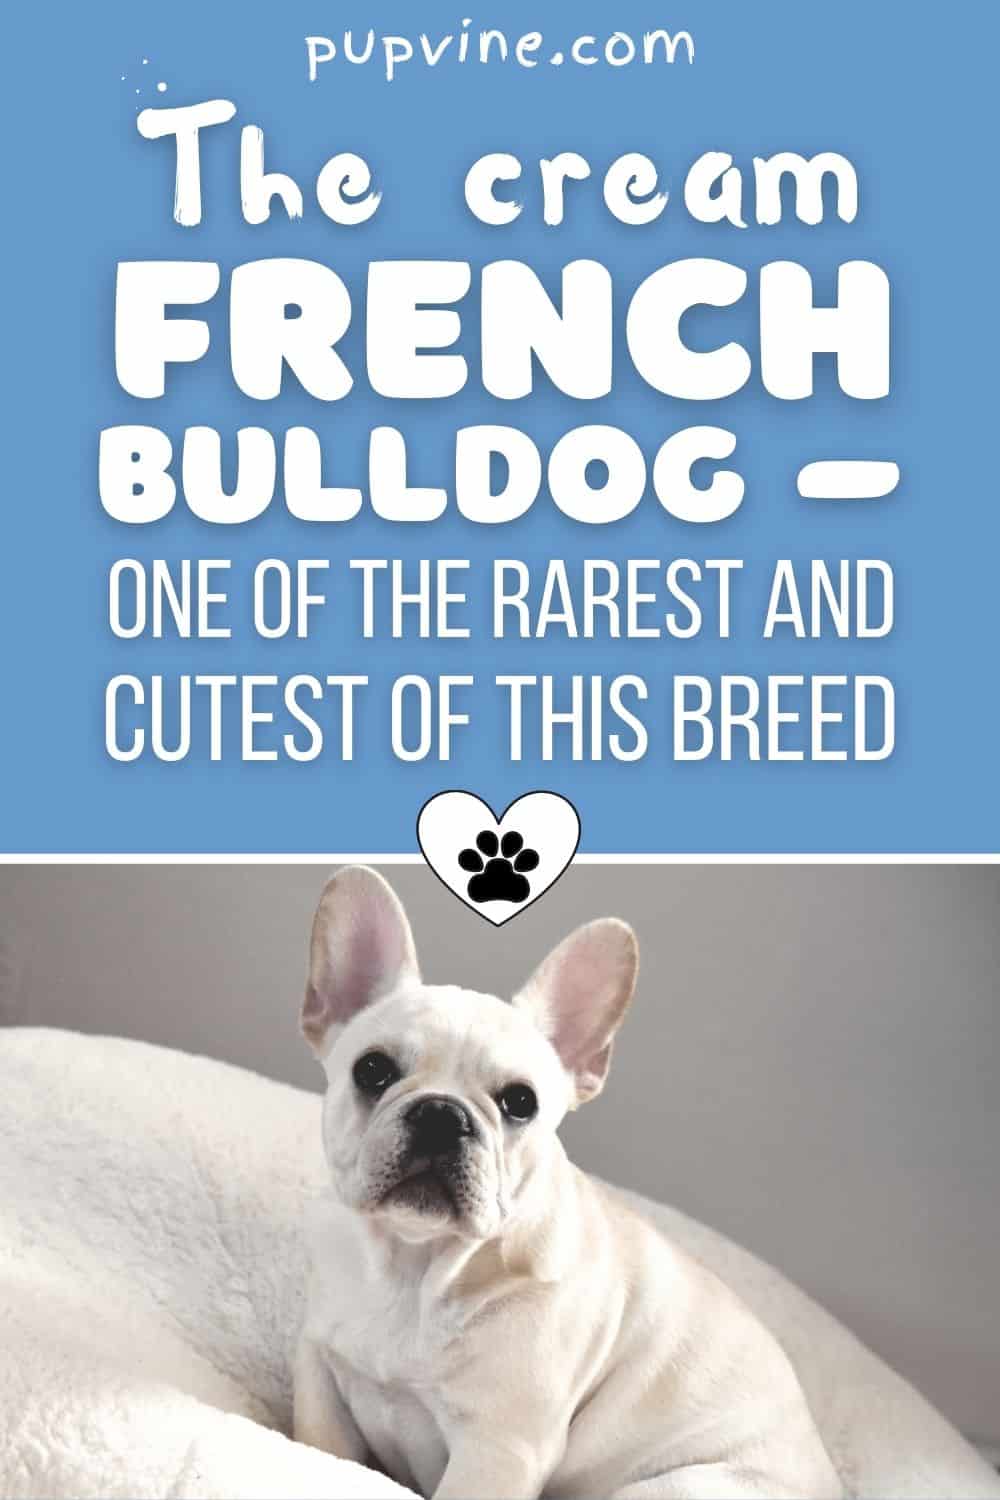 The Cream French Bulldog – One Of The Rarest And Cutest Of This Breed